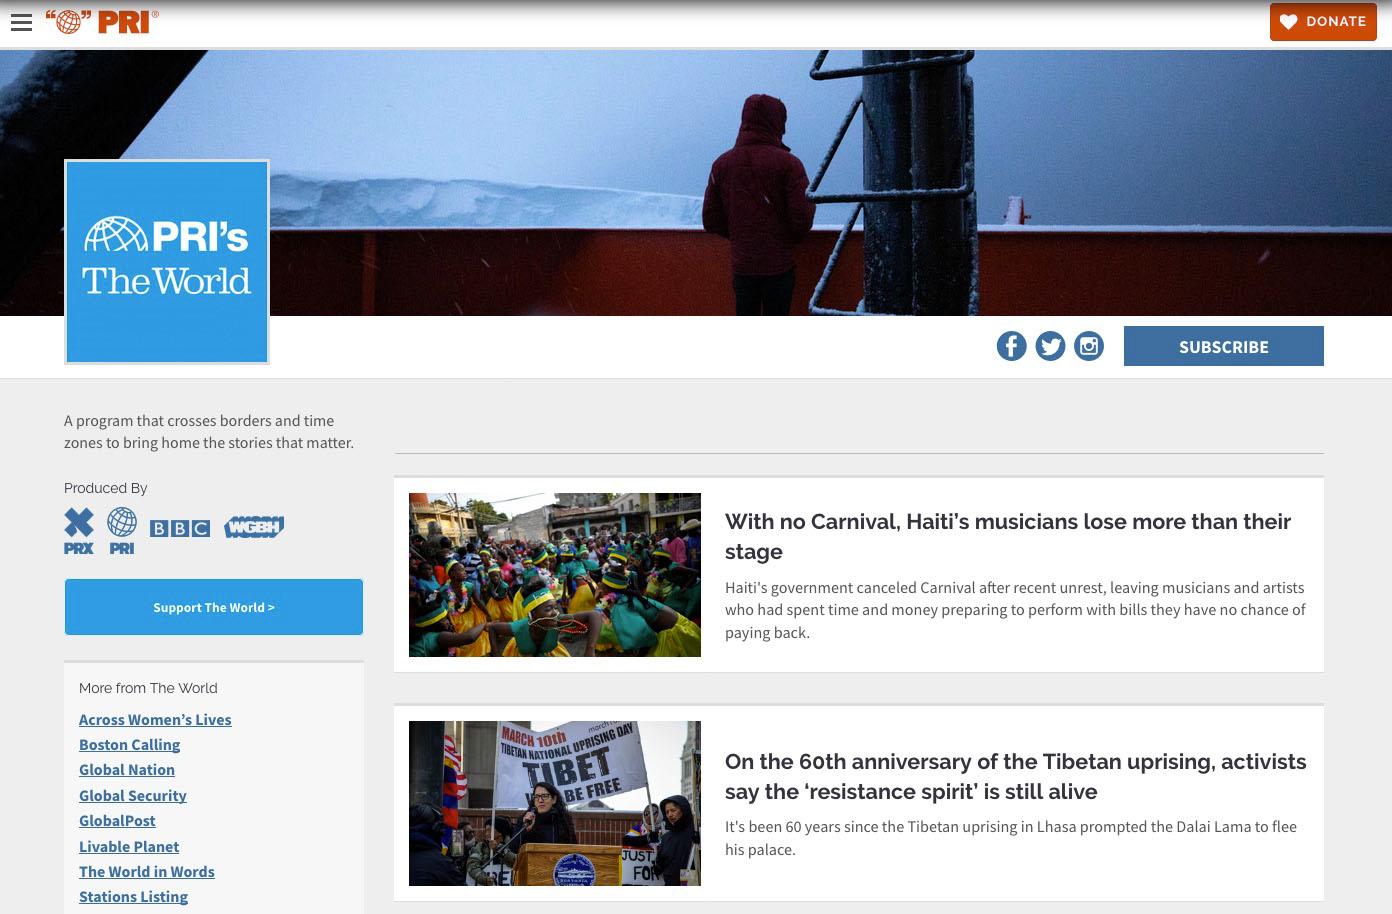 The World's website in 2019 featured a story about the cancelation of Carnival in Haiti.